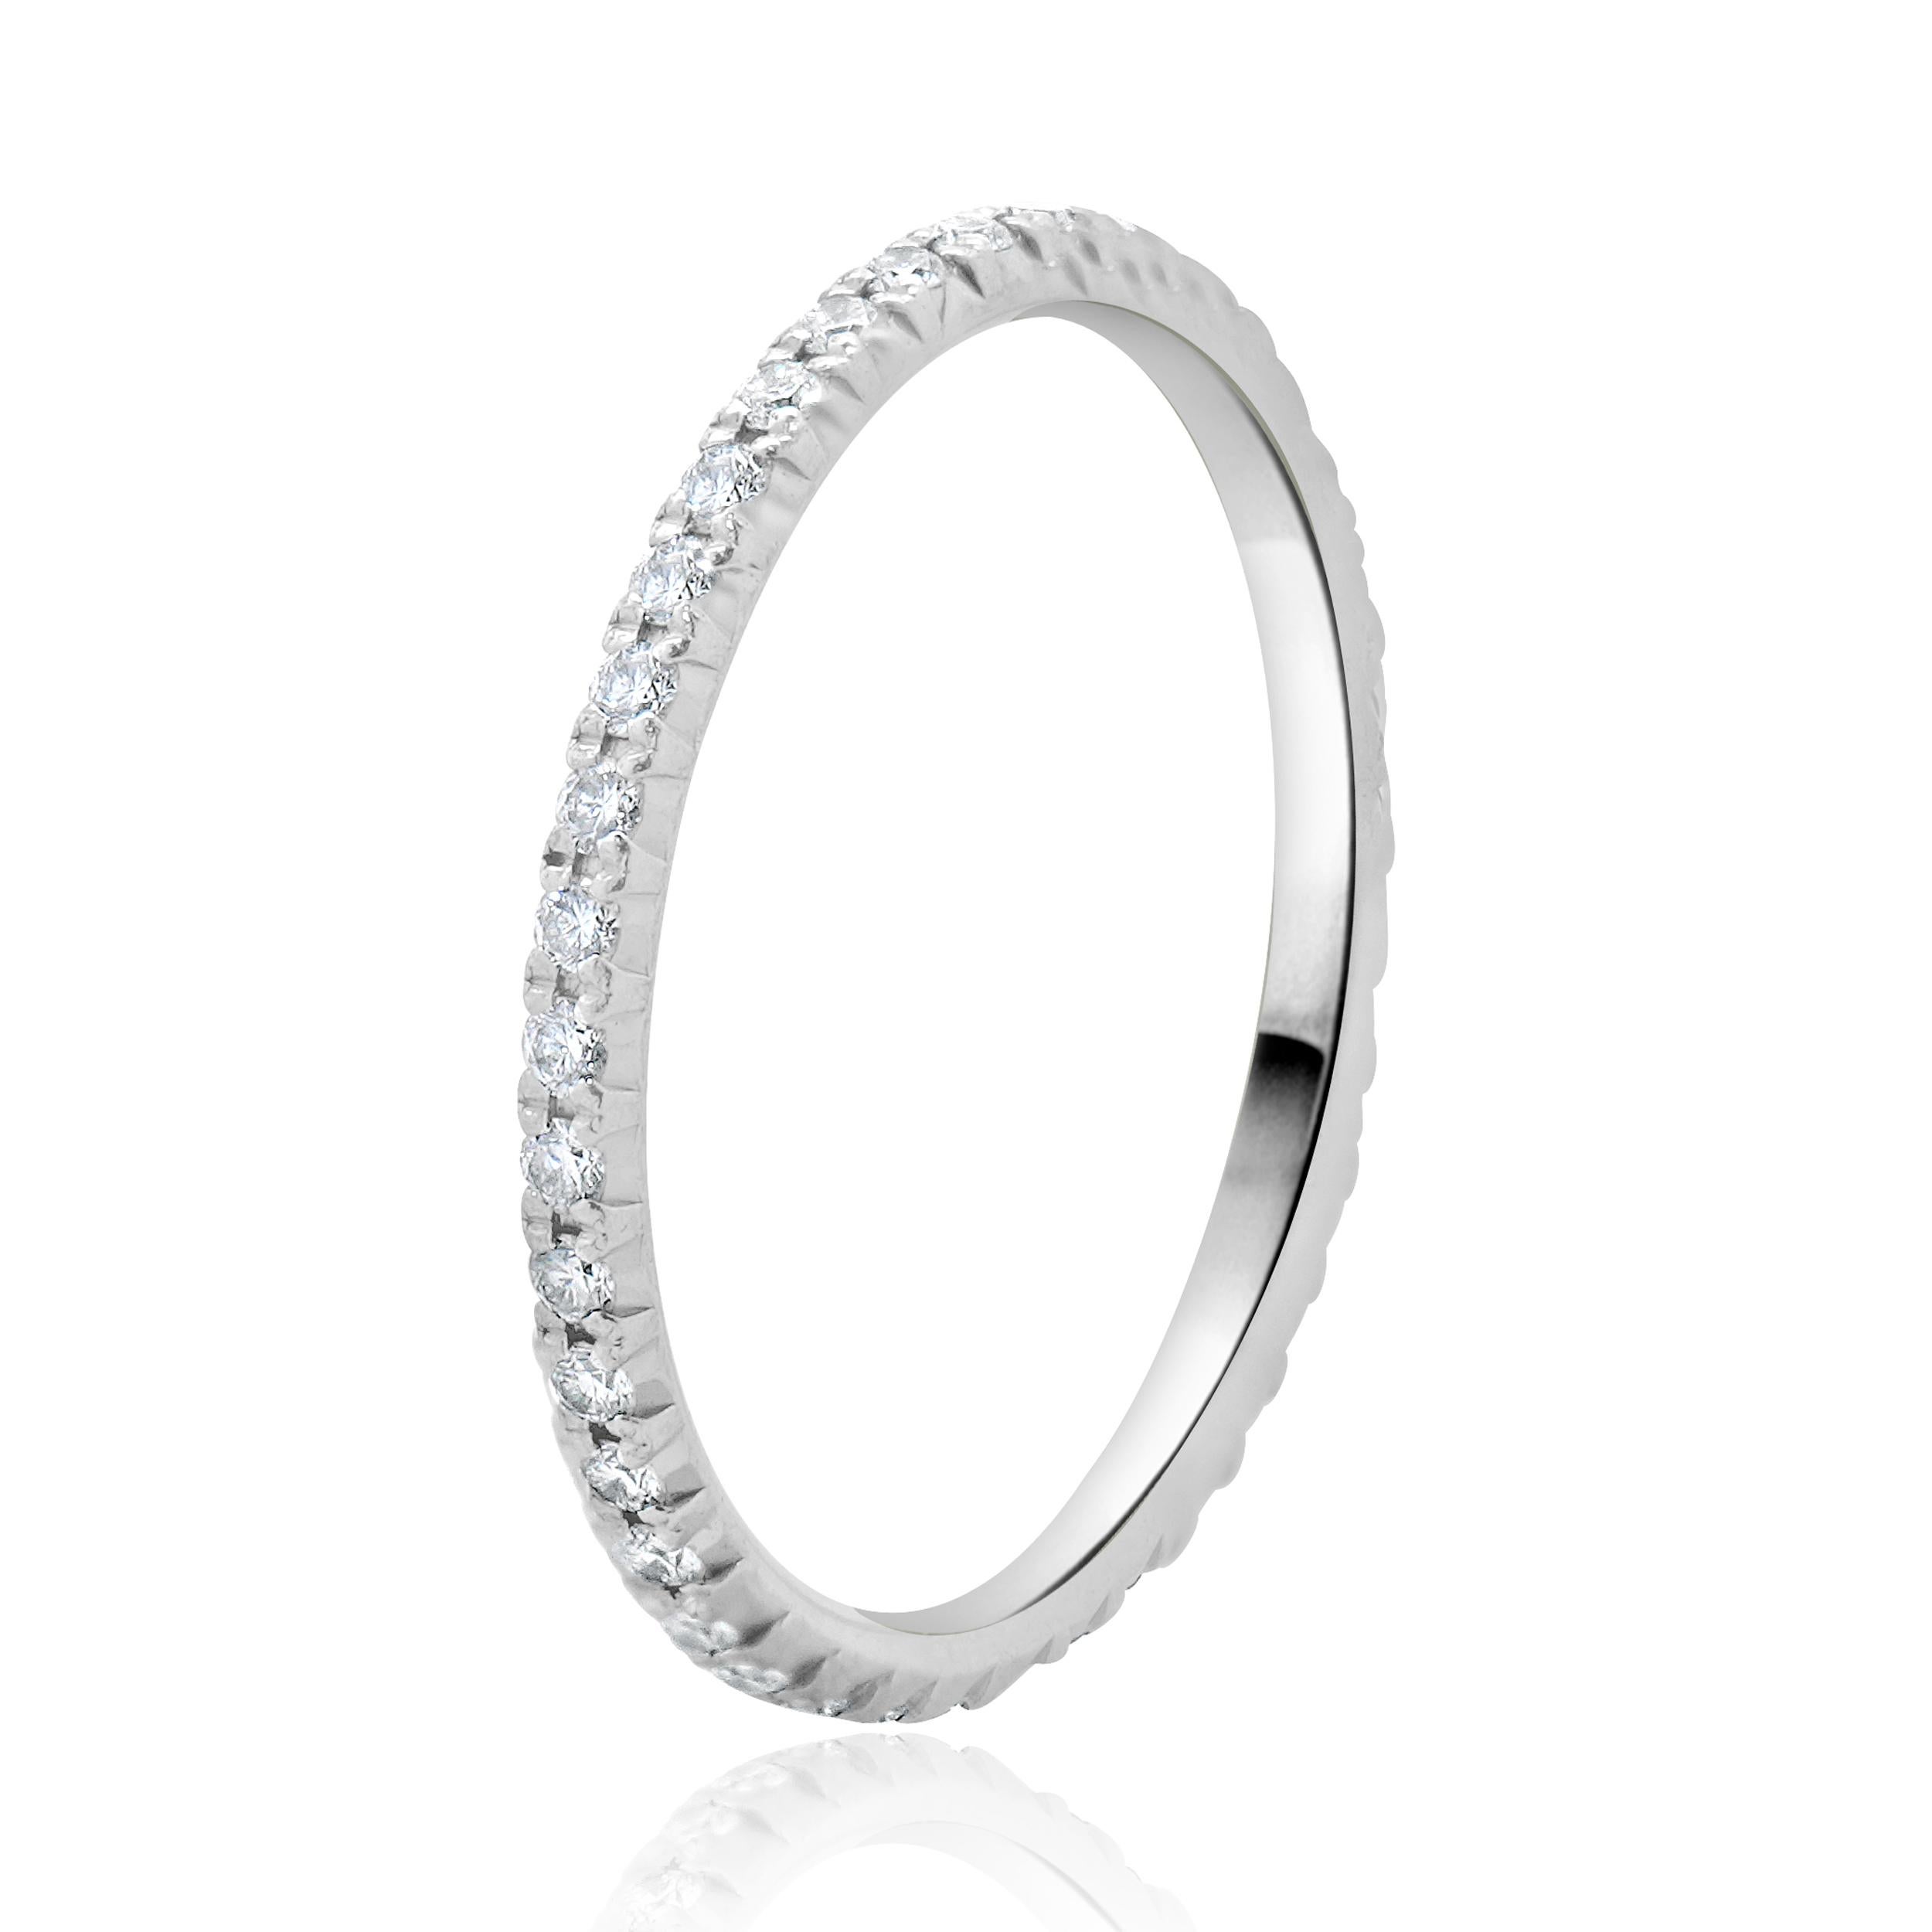 Designer: Tiffany & Co. 
Material: platinum
Diamond: 40 round brilliant cut = 0.19cttw
Color: G
Clarity: VS1-2
Dimensions: ring top measures 1.5mm wide
Size: 5
Weight: 1.33 grams
